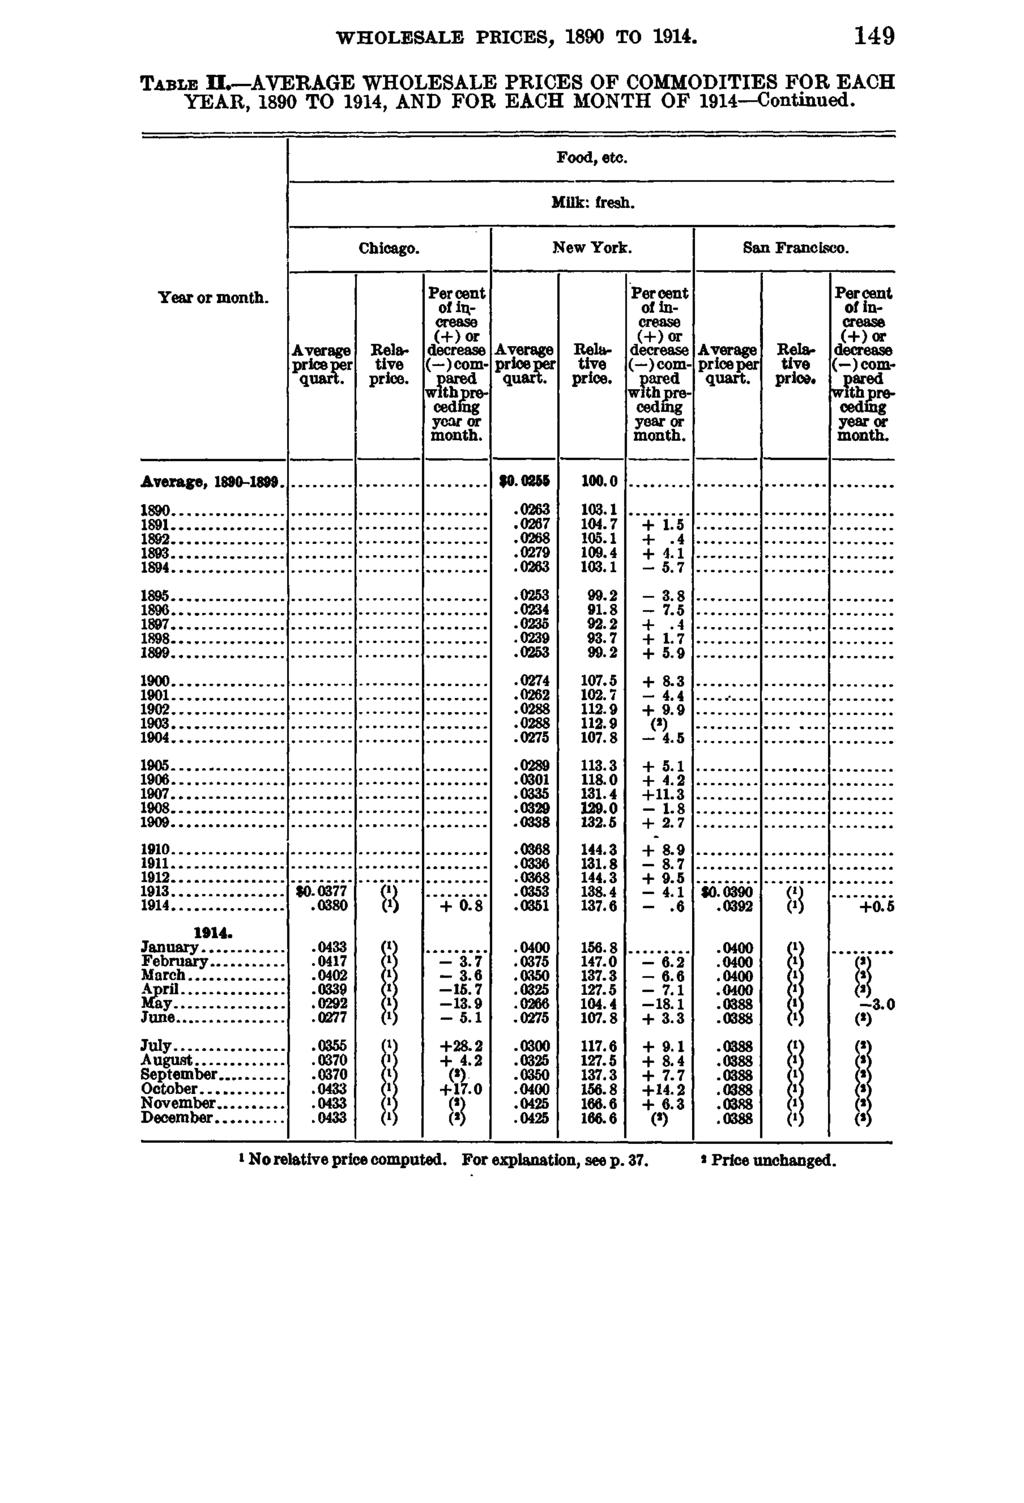 WHOLESALE PRICES, 1890 TO 149 T a b l e n. AVERAGE WHOLESALE PRICES OF COMMODITIES FOR EACH YEAR, 1890 TO 1914, AND FOR EACH MONTH OF 1914 Continued. Food, etc. Milk: fresh. Chicago. New York.